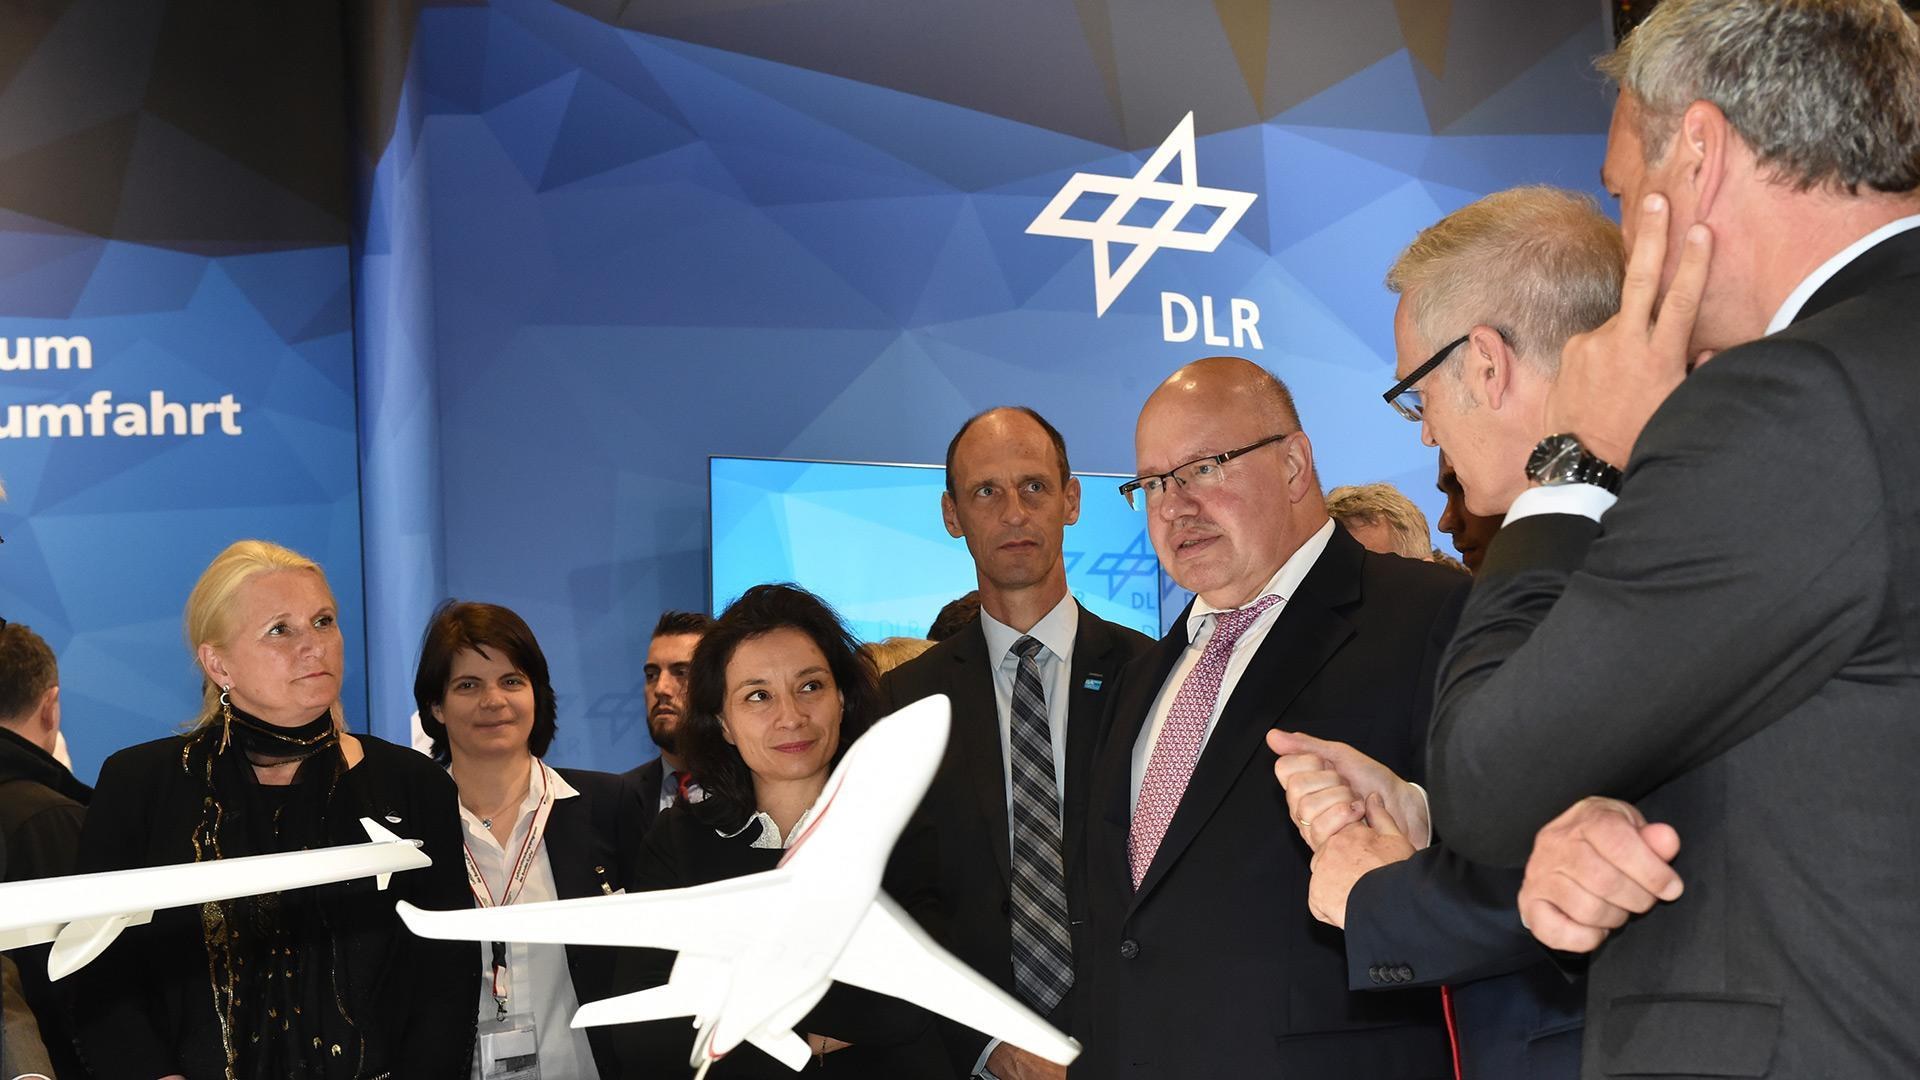 Federal Minister for Economic Affairs and Energy Peter Altmaier visits the DLR stand at ILA